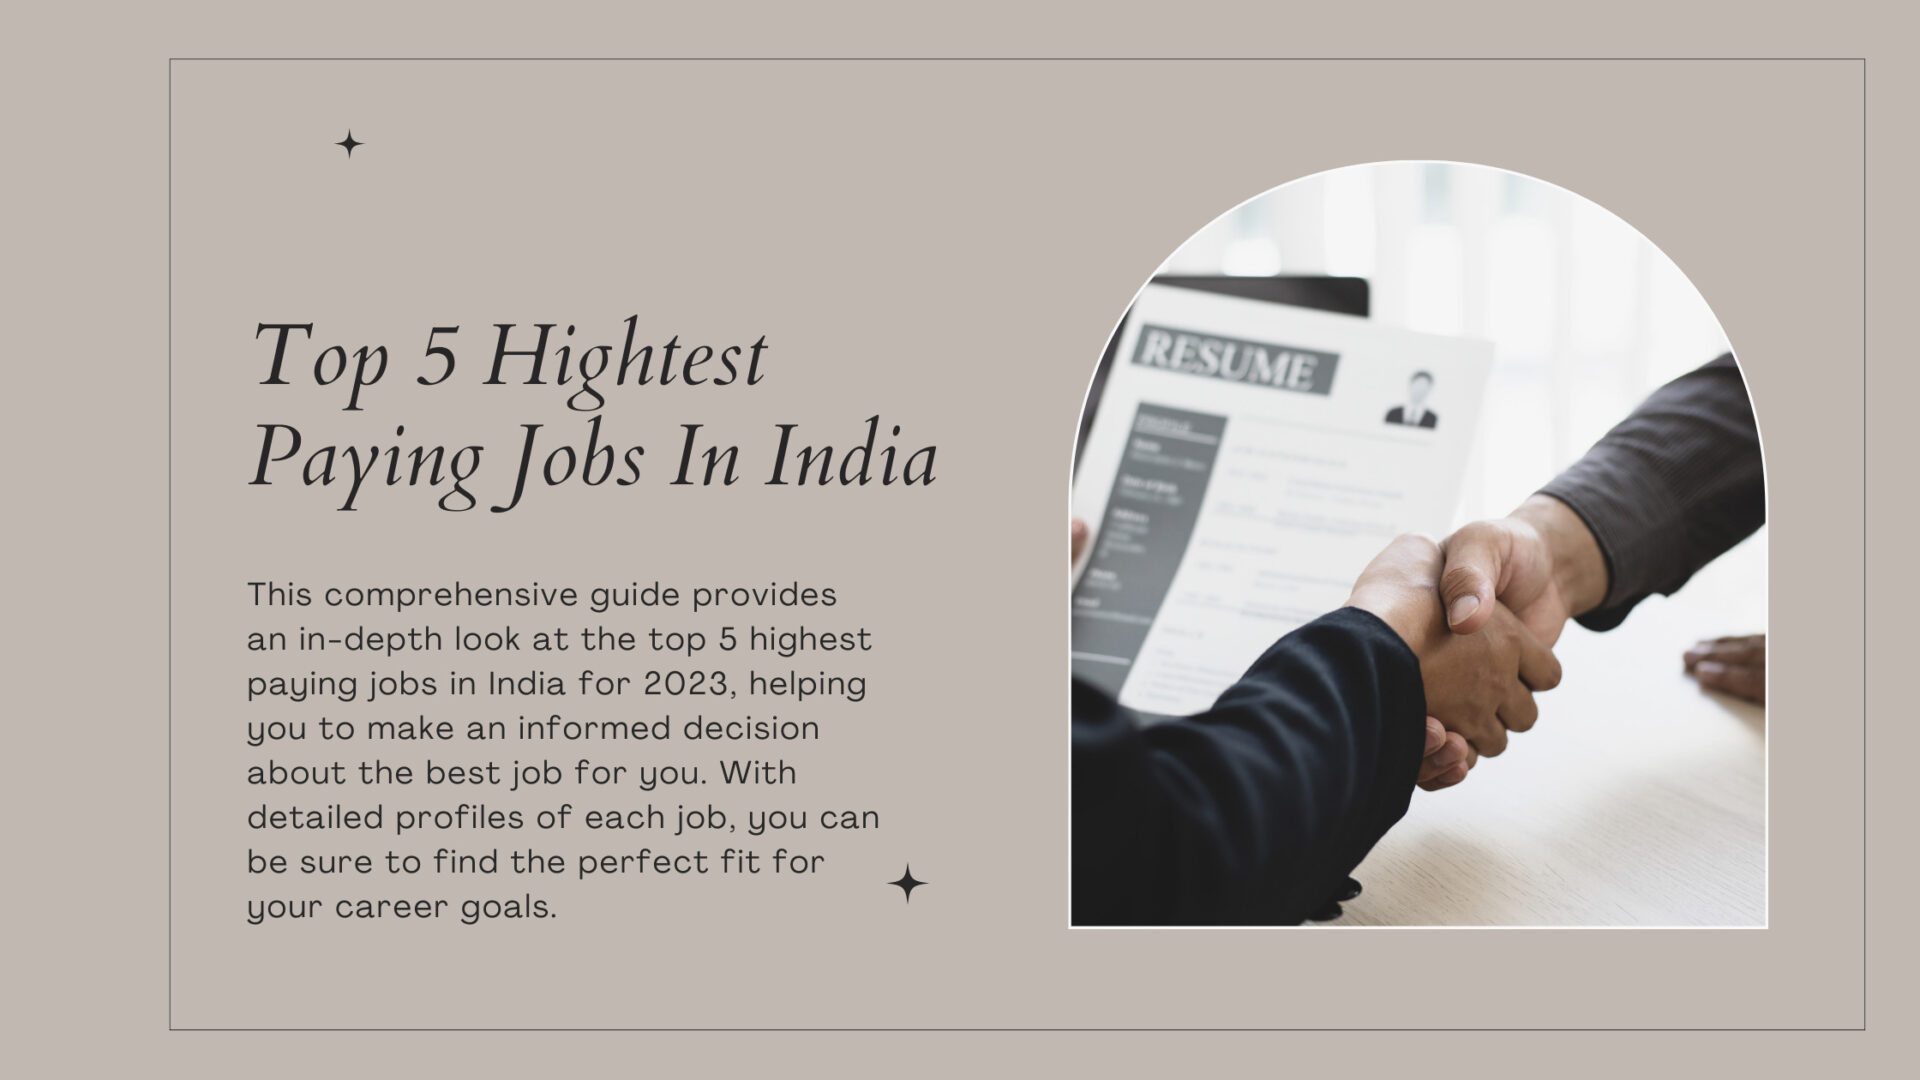 Top 5 Highest Paying Jobs in India for 2023